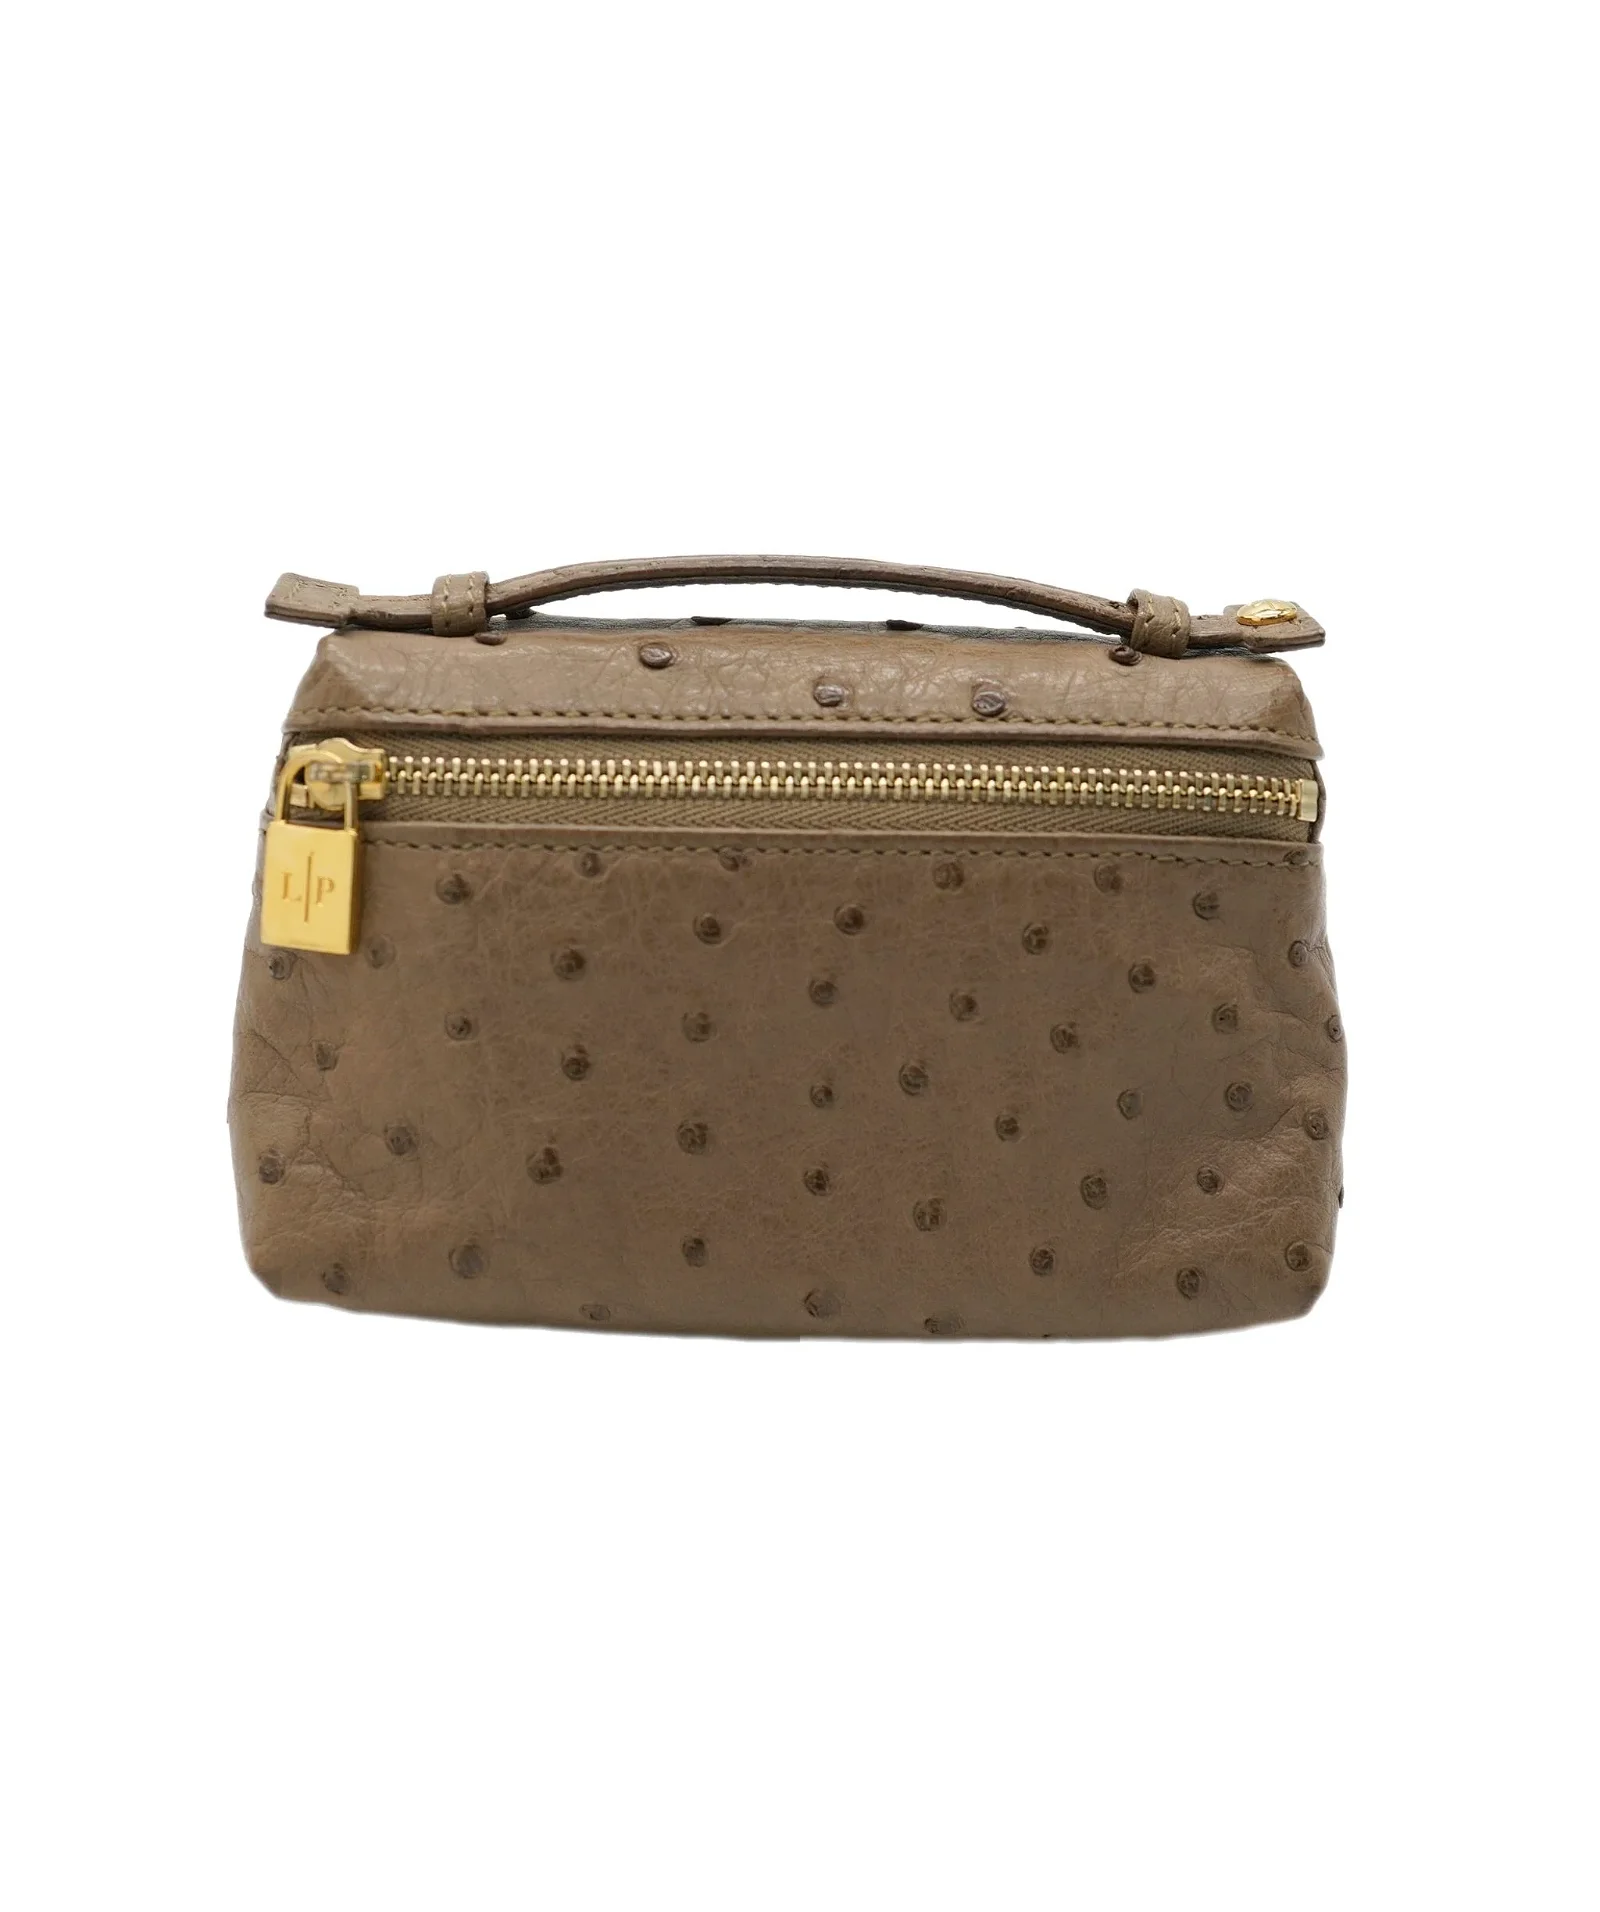 Image of Loro Piana Brown Micro Pocket Pouch Bag in Ostrich Leather with Gold Hardware RRP 3500 ALC1358